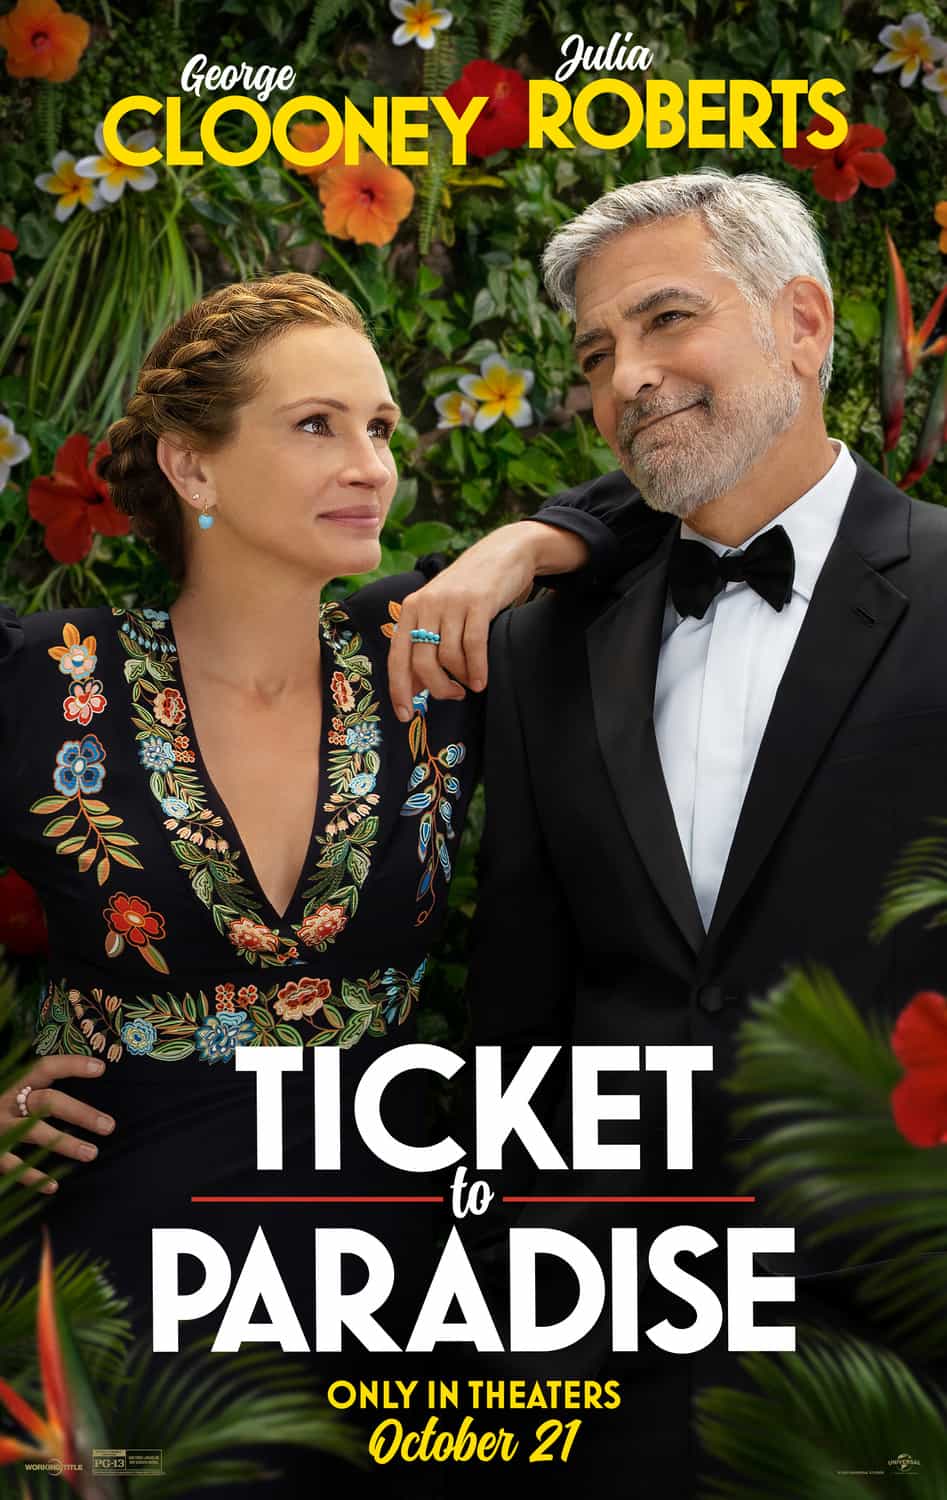 UK Box Office Weekend Report 23rd - 25th September 2022:  George Clooney and Julia Roberts lead the way in Ticket To Paradise in an all new top 3 at the UK box office